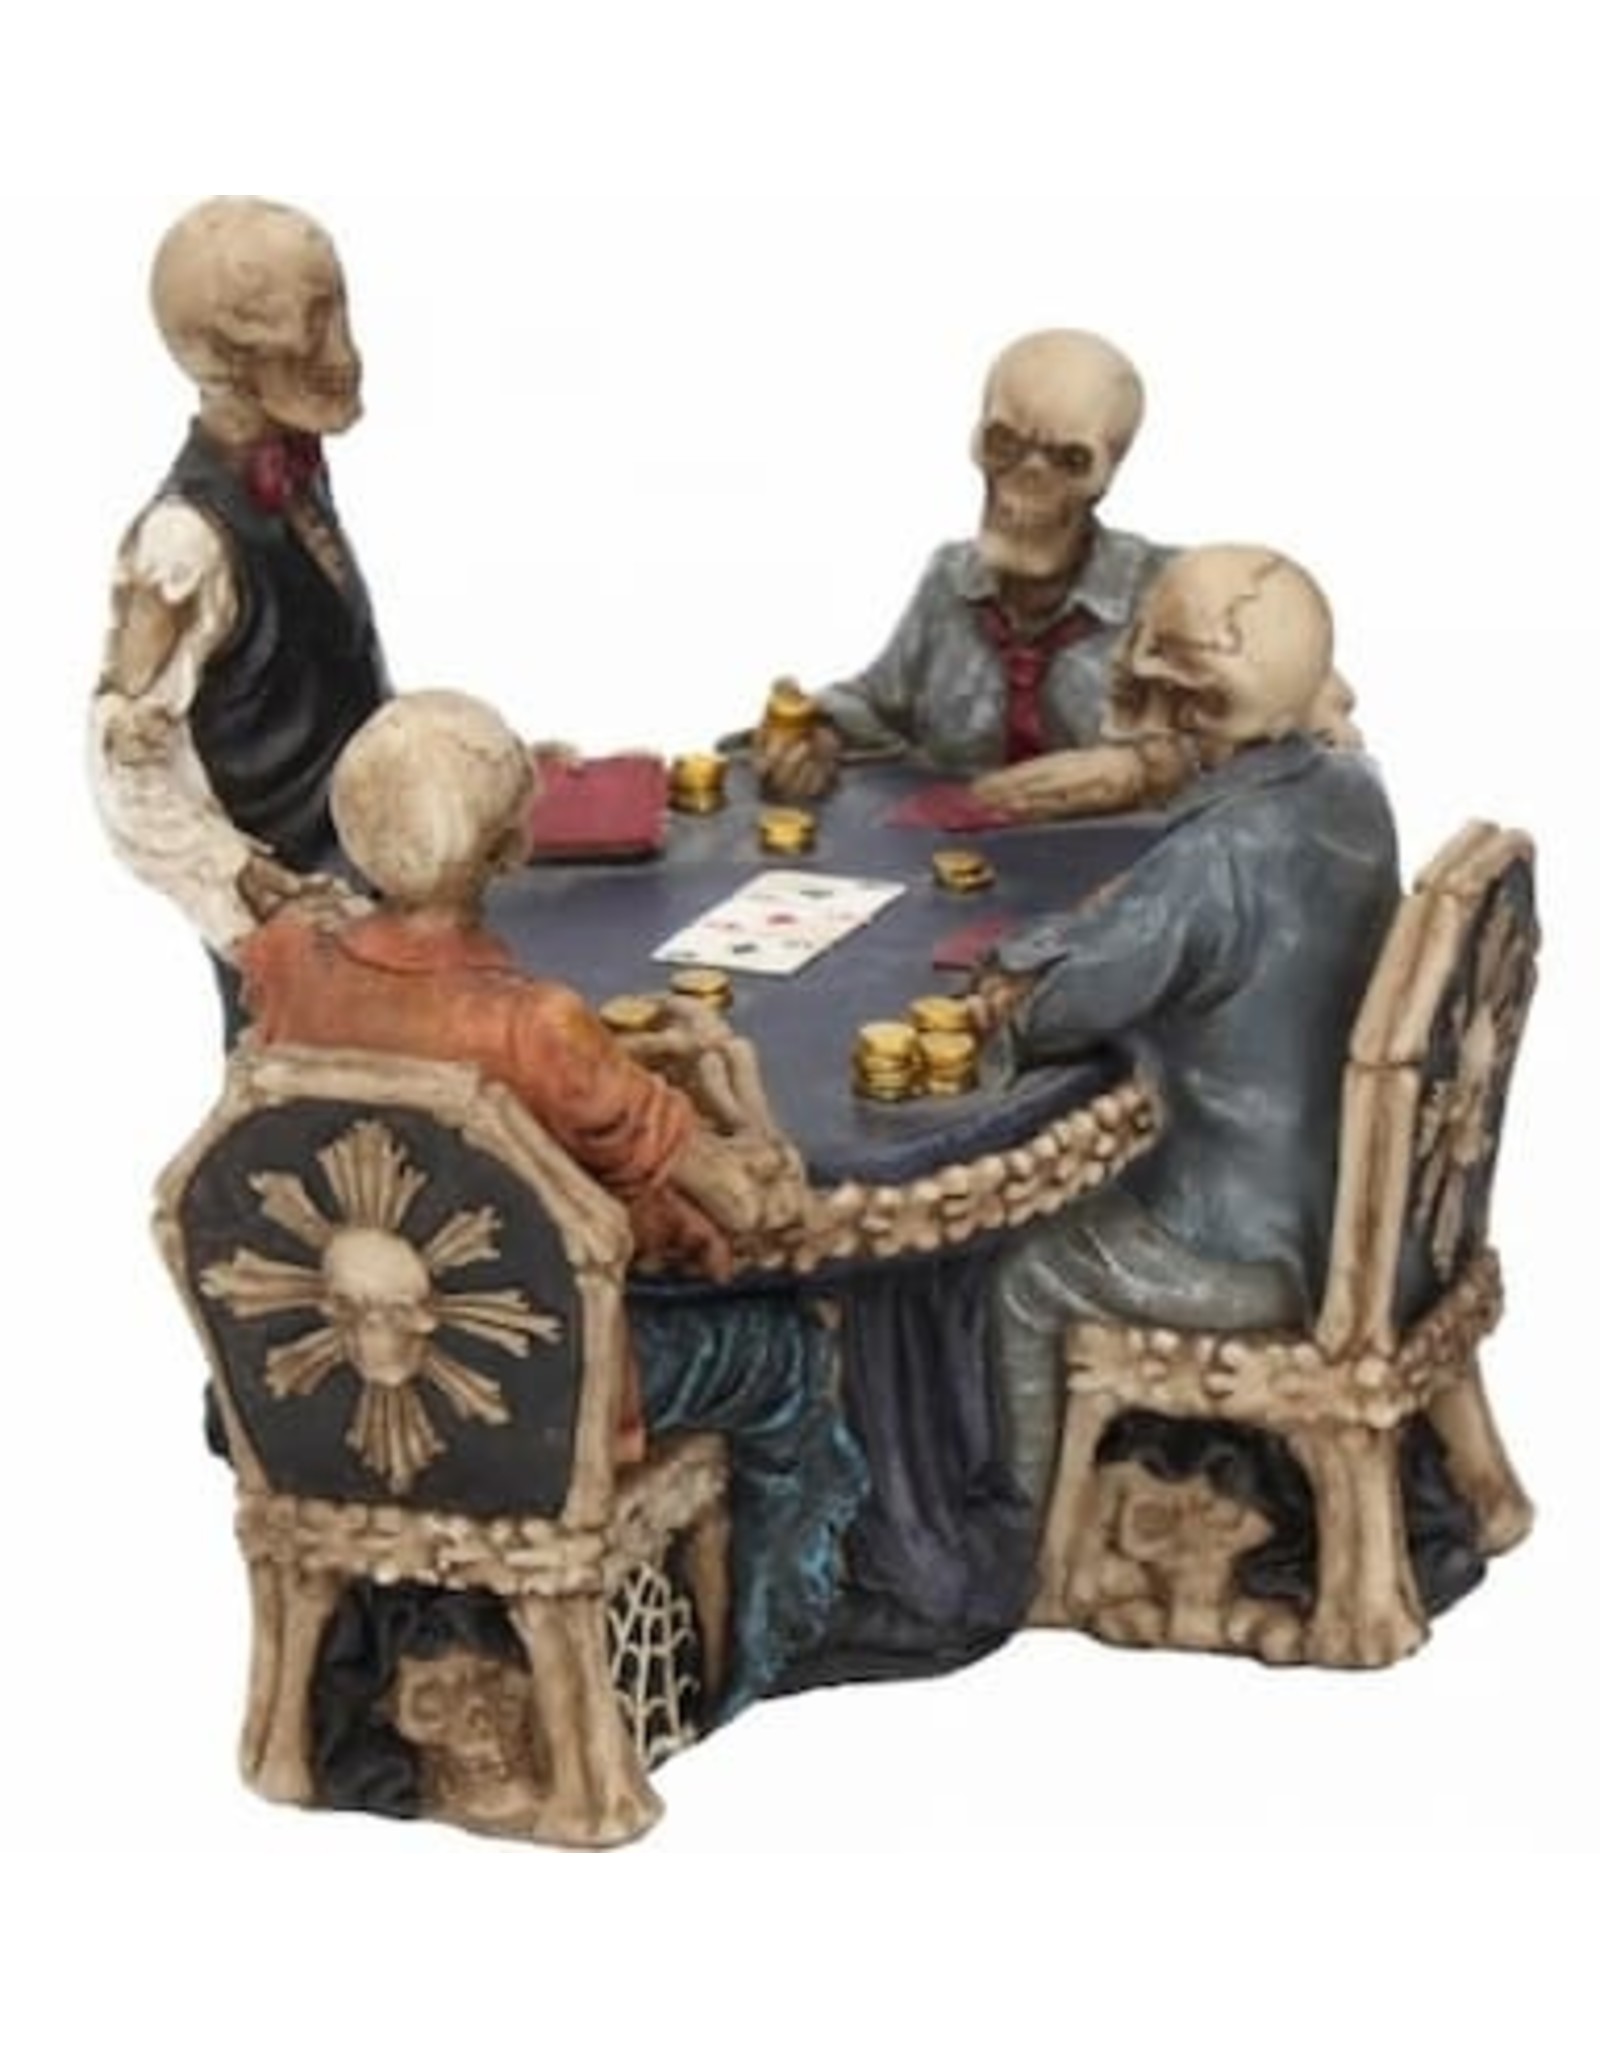 NemesisNow Collectables - Poker table with Skeletons End Game Nemesis Now